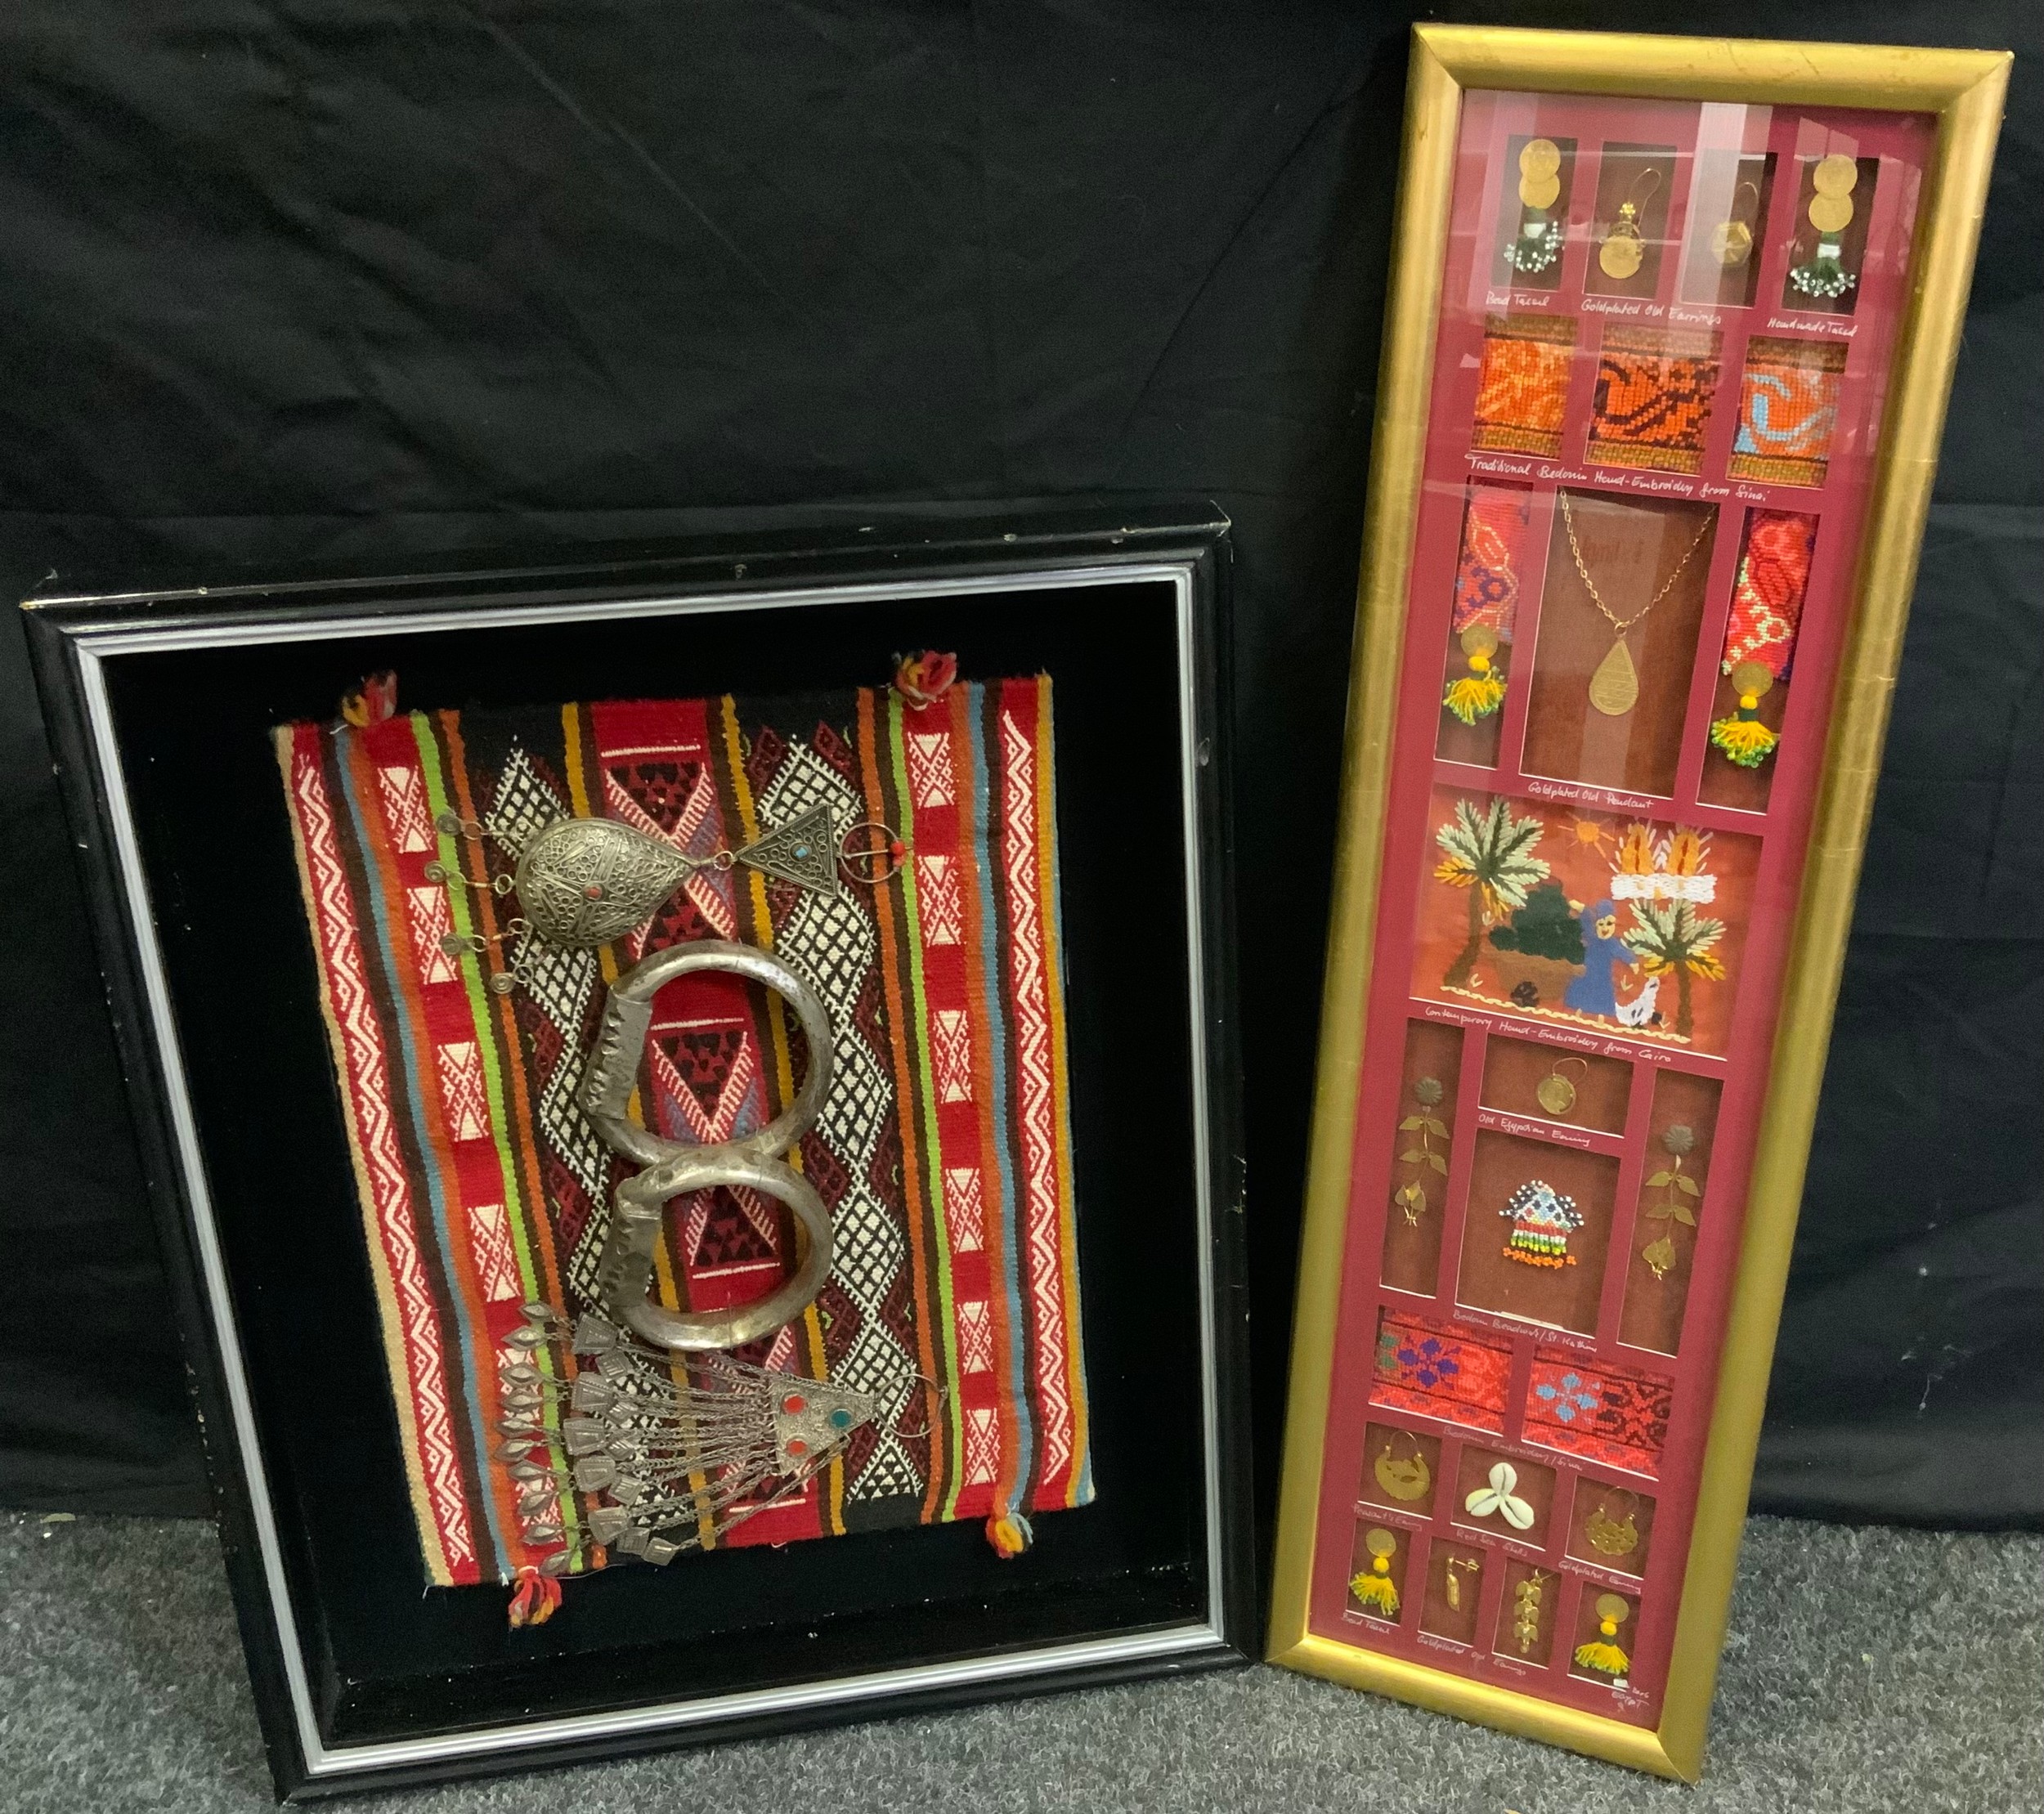 Tribal Art - Egyptian metal necklaces and other adornments, framed; Bedouin jewellery, framed (2)